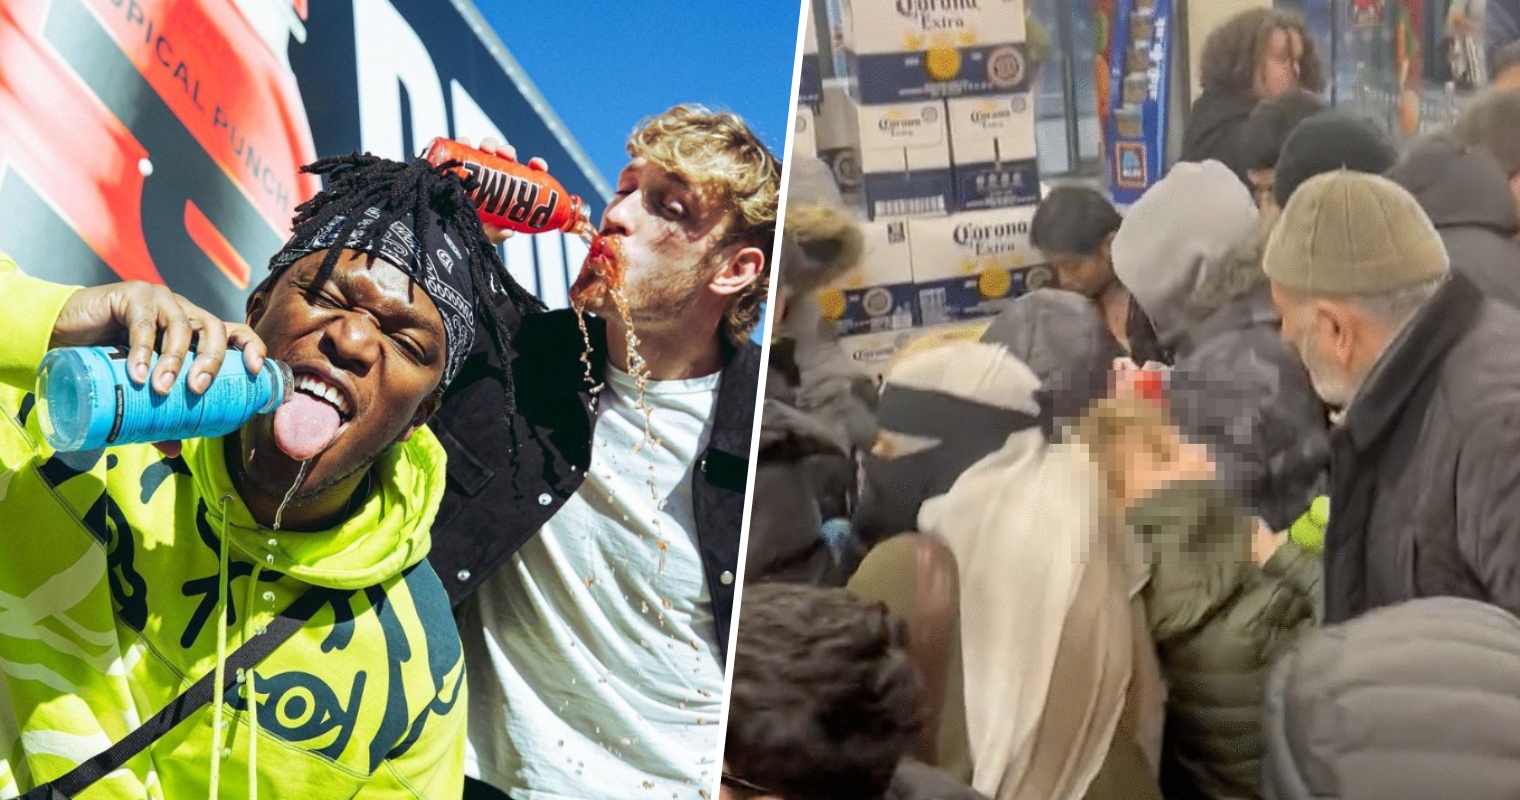 Logan Paul and KSI's Prime Energy Drink Sold Out at UK Aldi